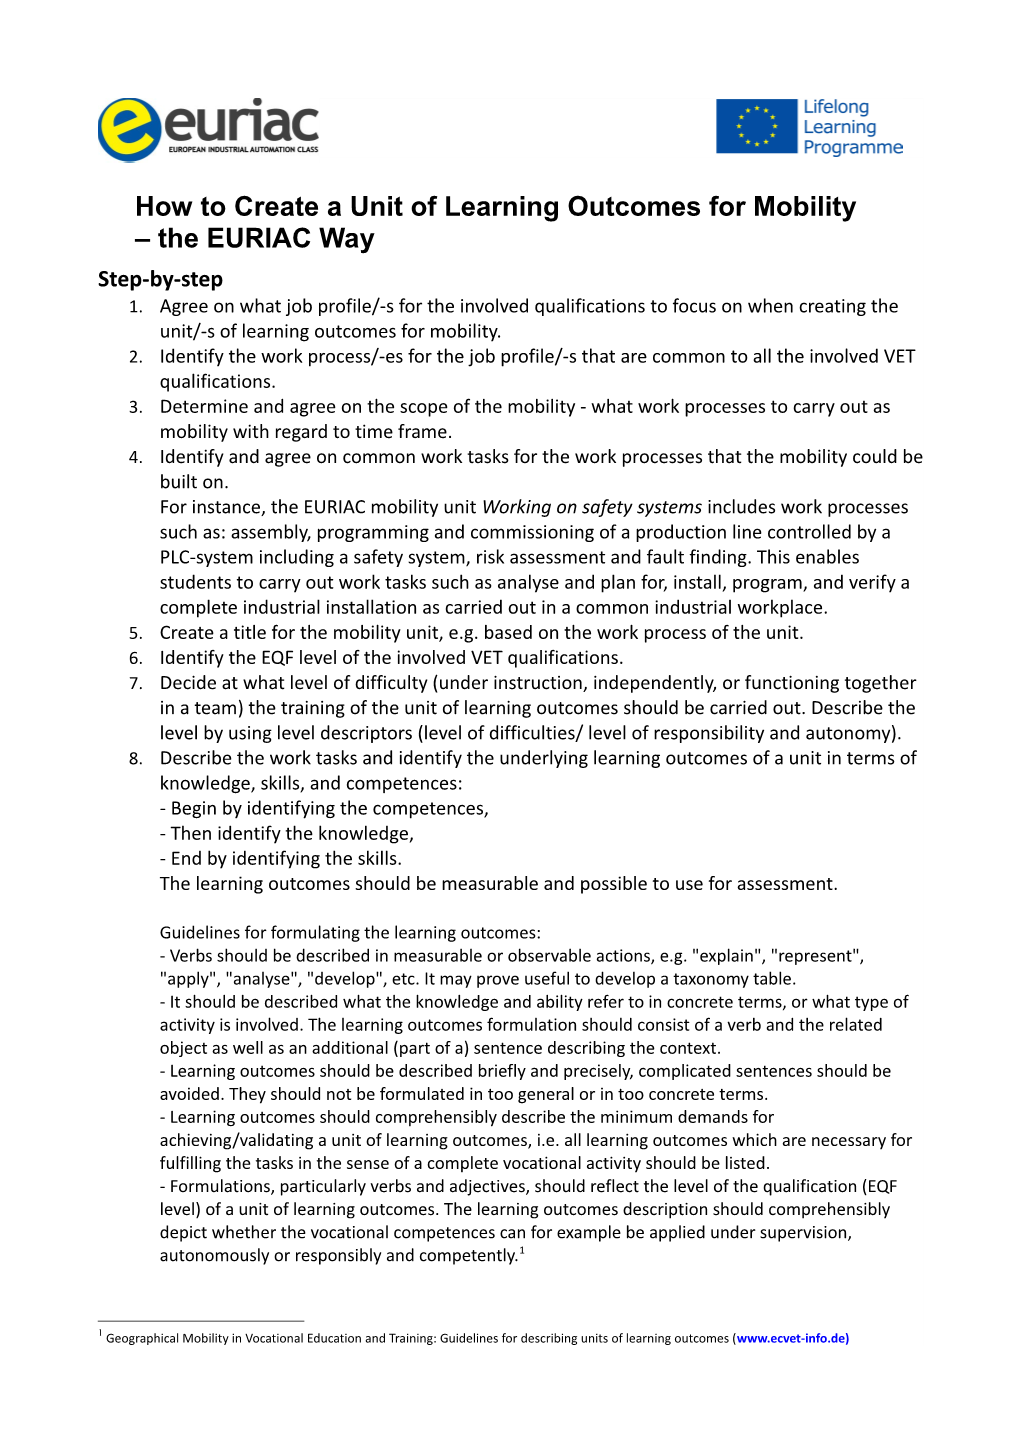 How to Create a Unit of Learning Outcomes for Mobility the EURIAC Way